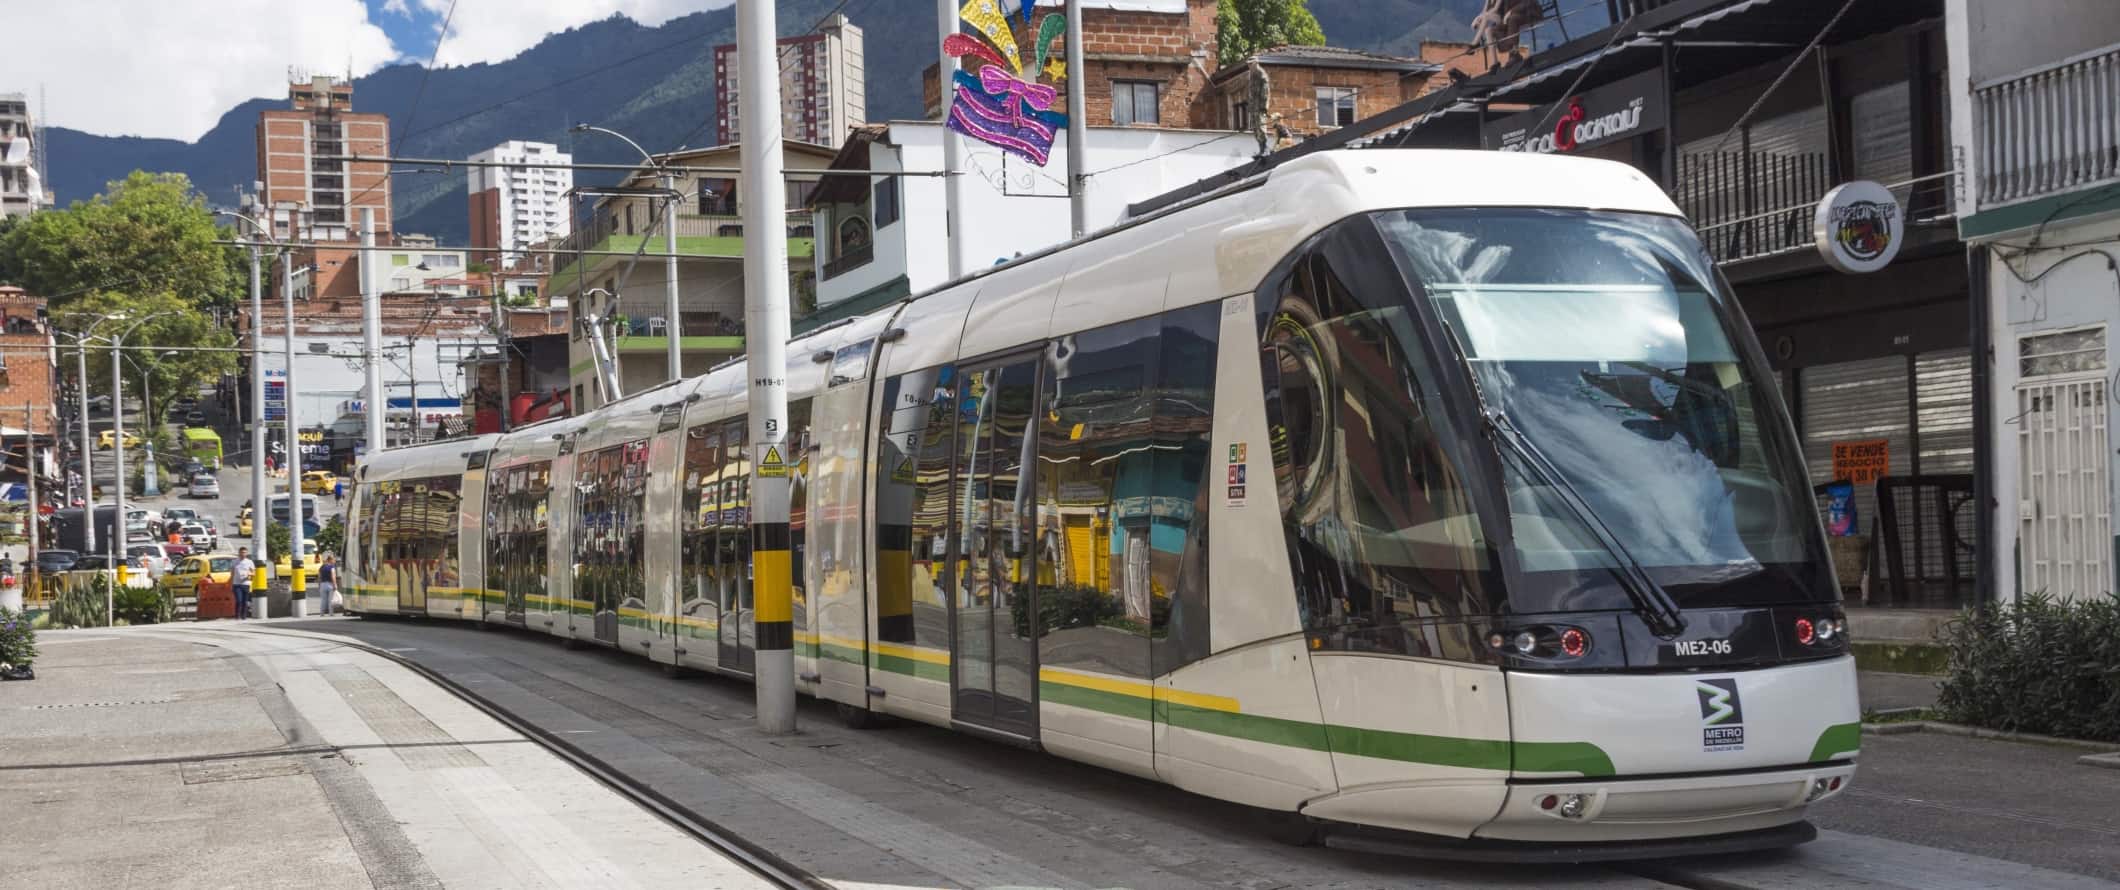 Tram going through the street in Medellin, Colombia